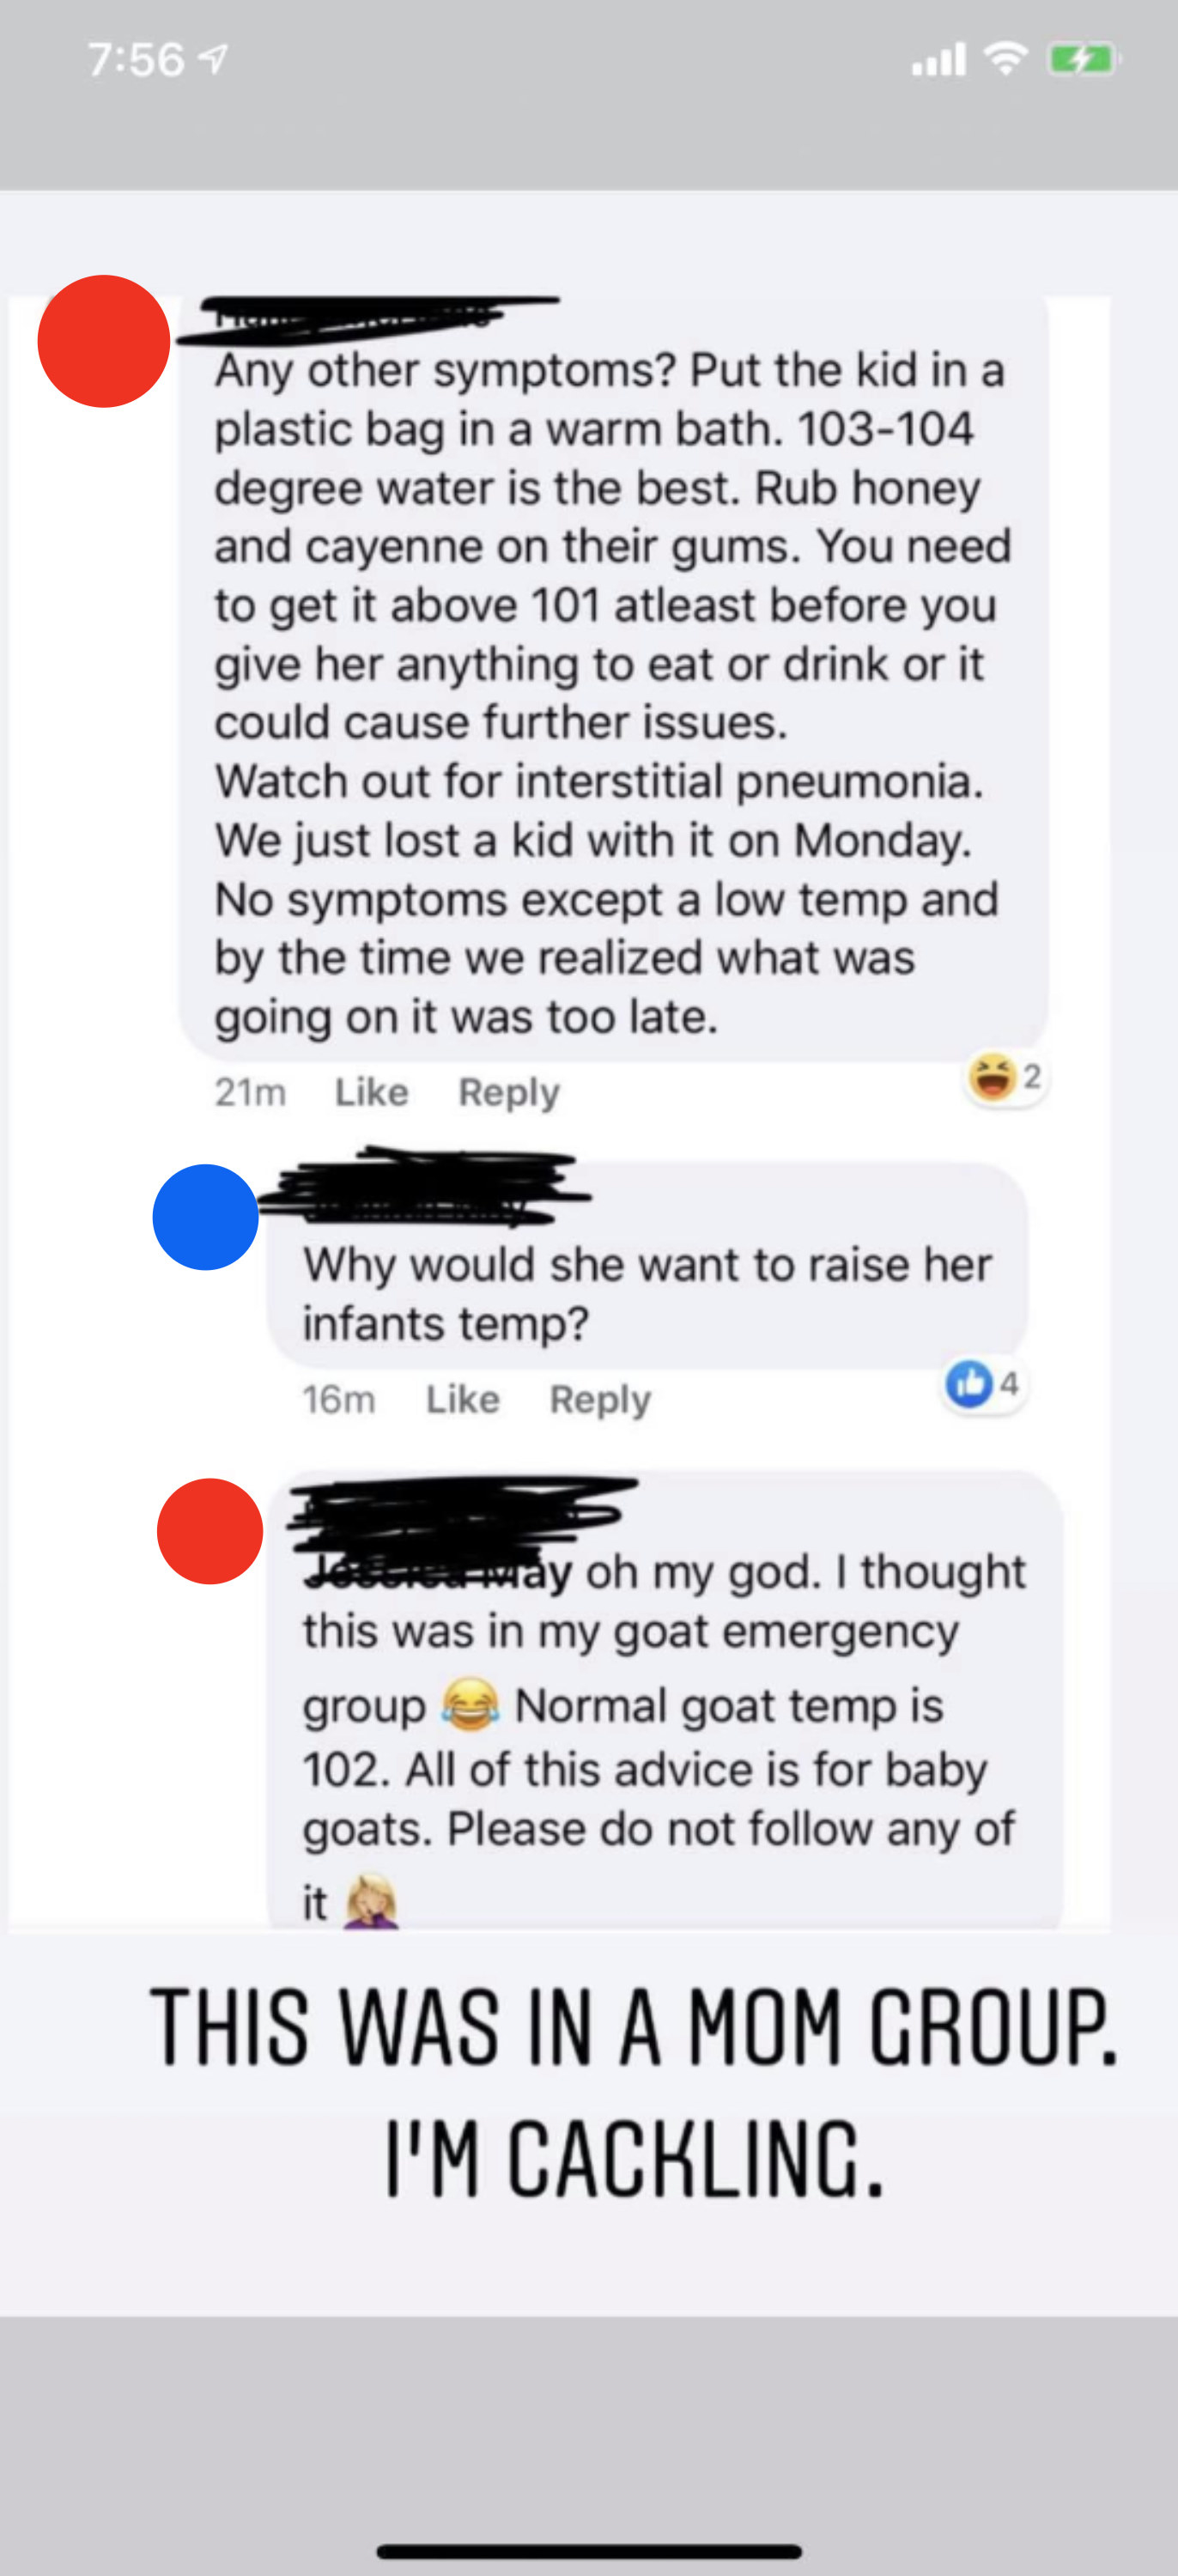 person accidentally giving advice for a baby goat in a mom group